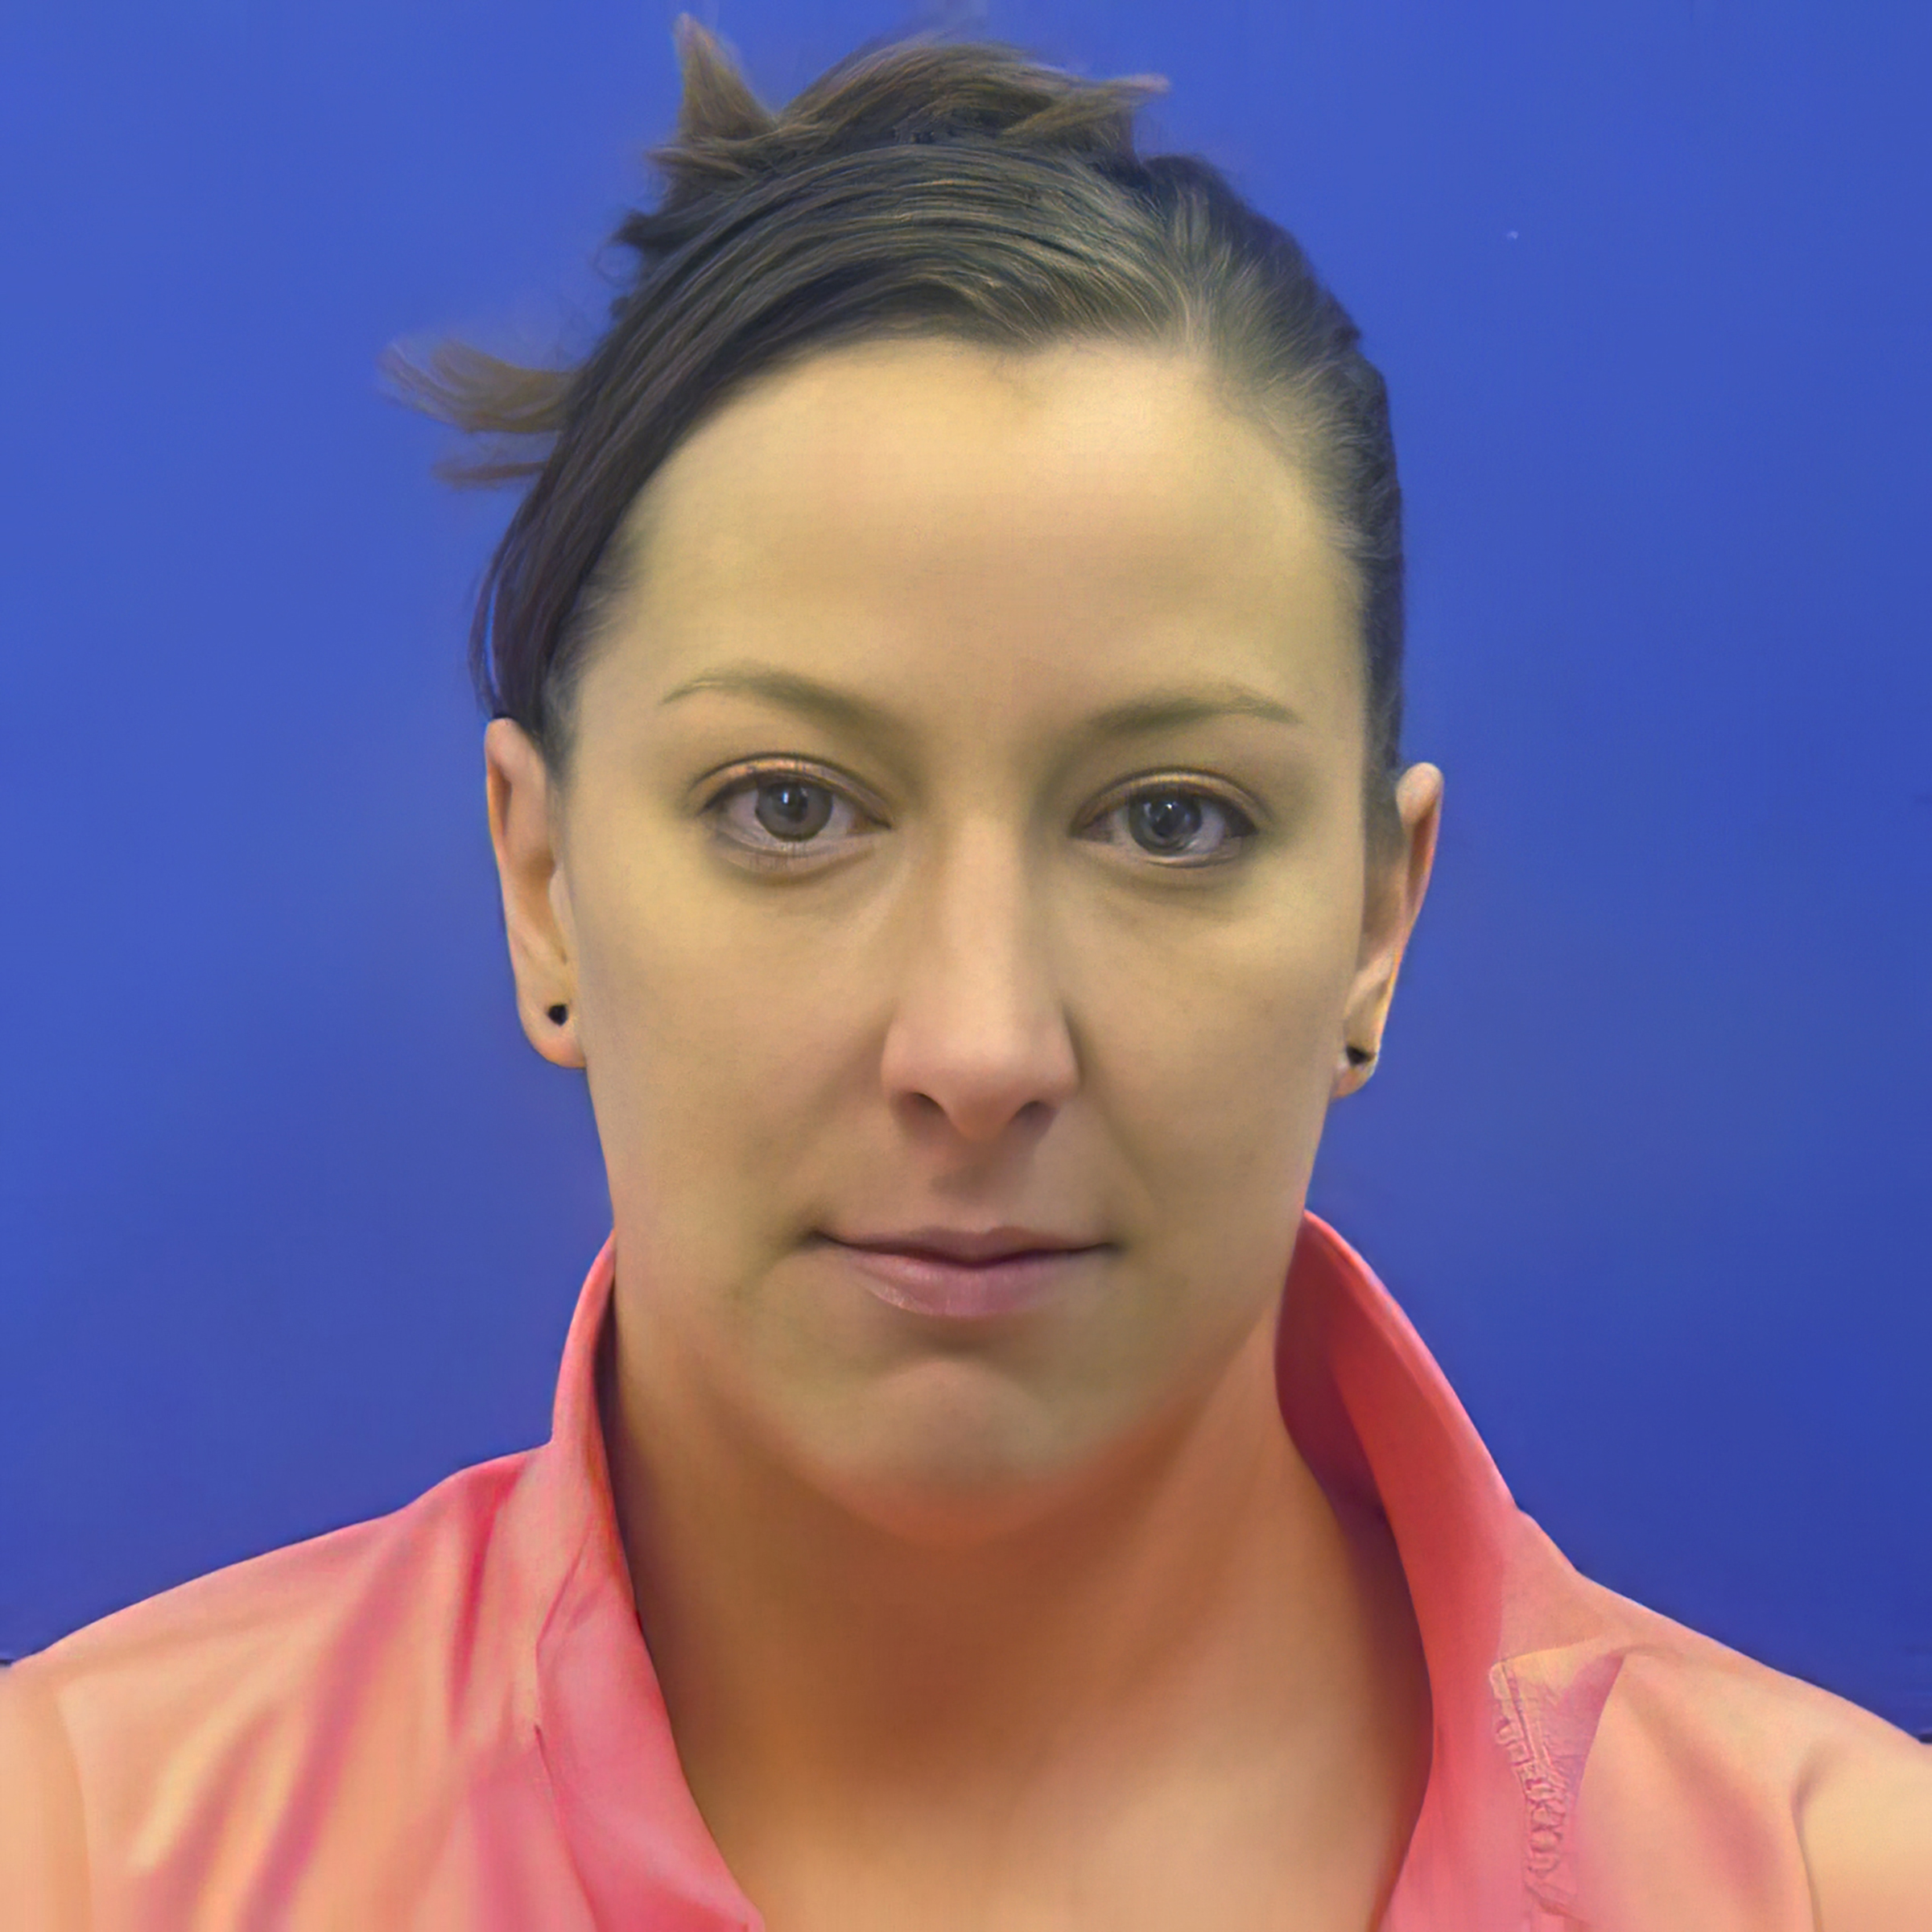 This driver's license photo from the Maryland Motor Vehicle Administration (MVA) shows Ashli Babbitt, who was fatally shot by an employee of the Capitol Police inside the U.S. Capitol building in Washington, D.C. on Jan. 6, 2021. (Maryland MVA/Courtesy of the Calvert County Sheriff’s Office via AP)